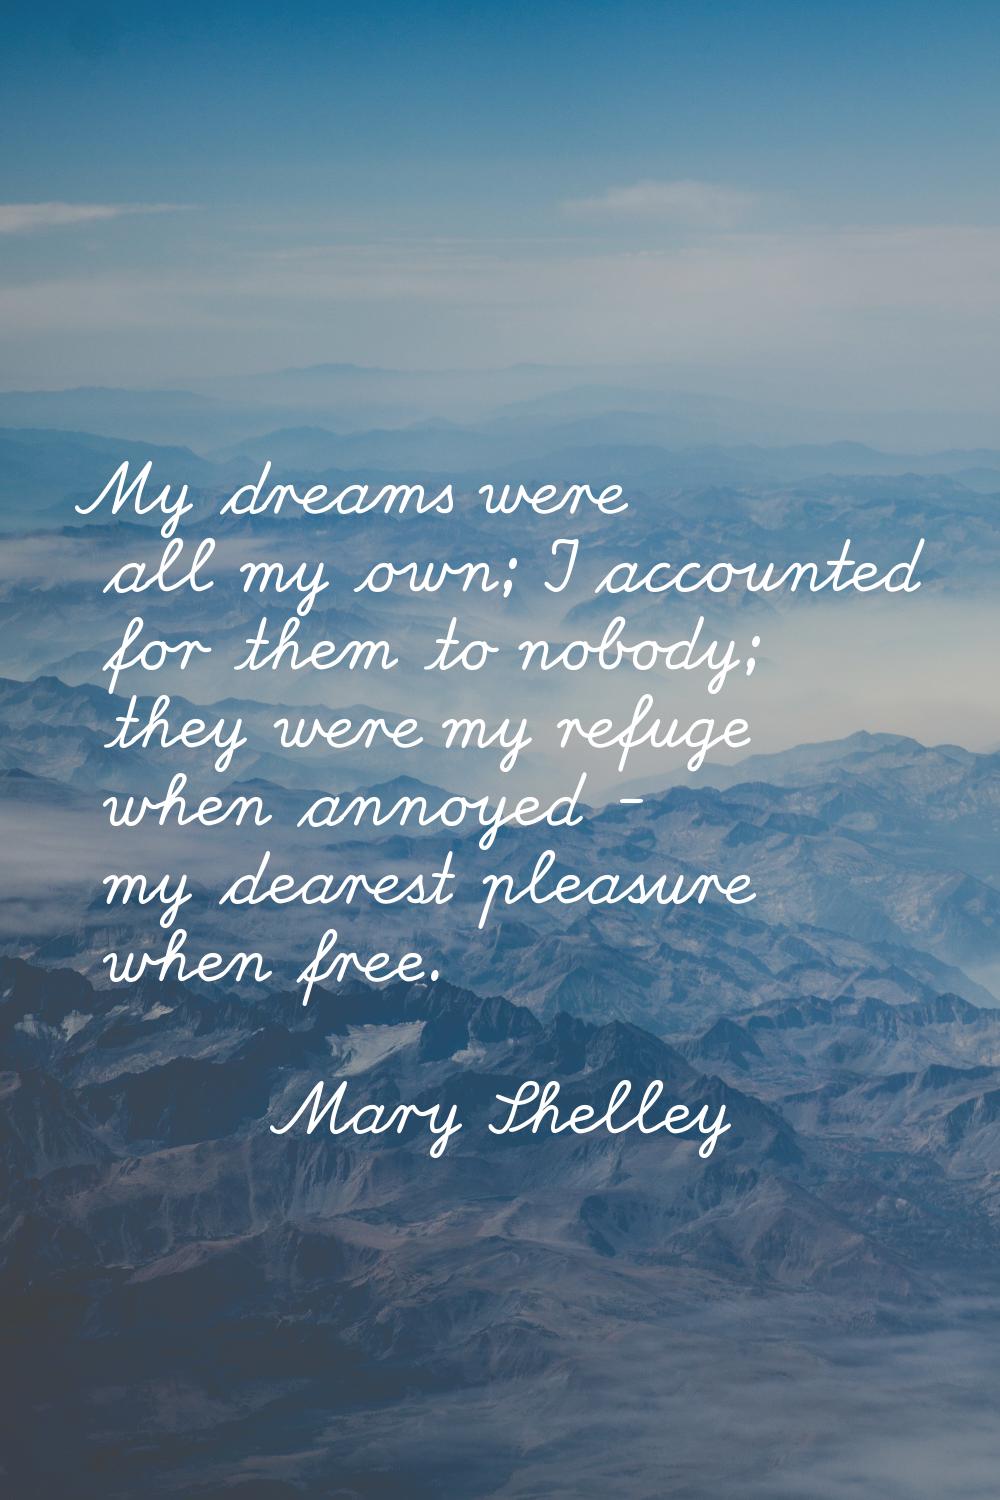 My dreams were all my own; I accounted for them to nobody; they were my refuge when annoyed - my de